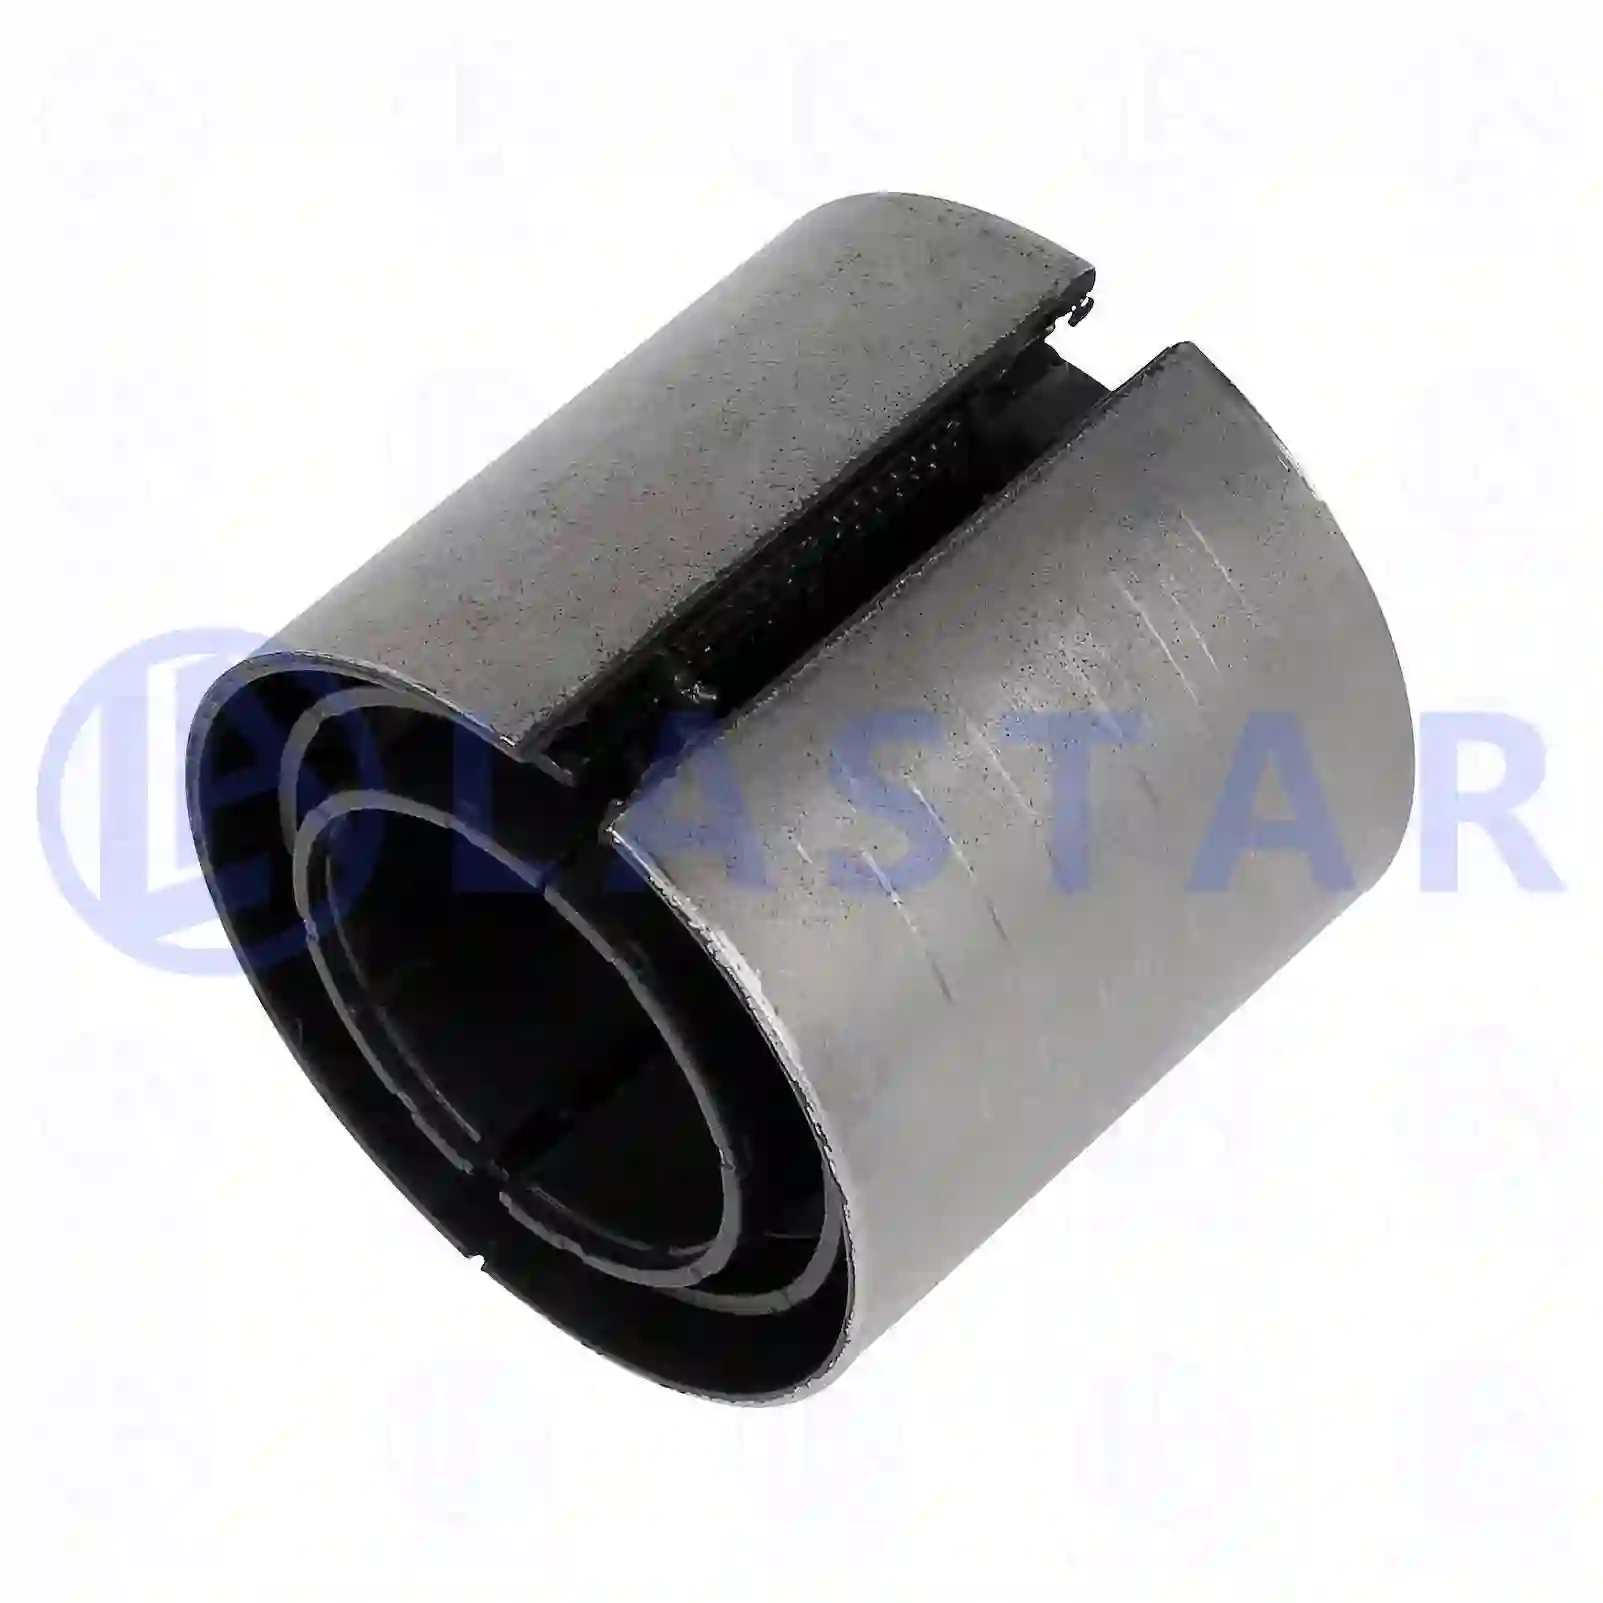 Bushing, stabilizer, 77728265, 0019882410, 6283220050, , ||  77728265 Lastar Spare Part | Truck Spare Parts, Auotomotive Spare Parts Bushing, stabilizer, 77728265, 0019882410, 6283220050, , ||  77728265 Lastar Spare Part | Truck Spare Parts, Auotomotive Spare Parts